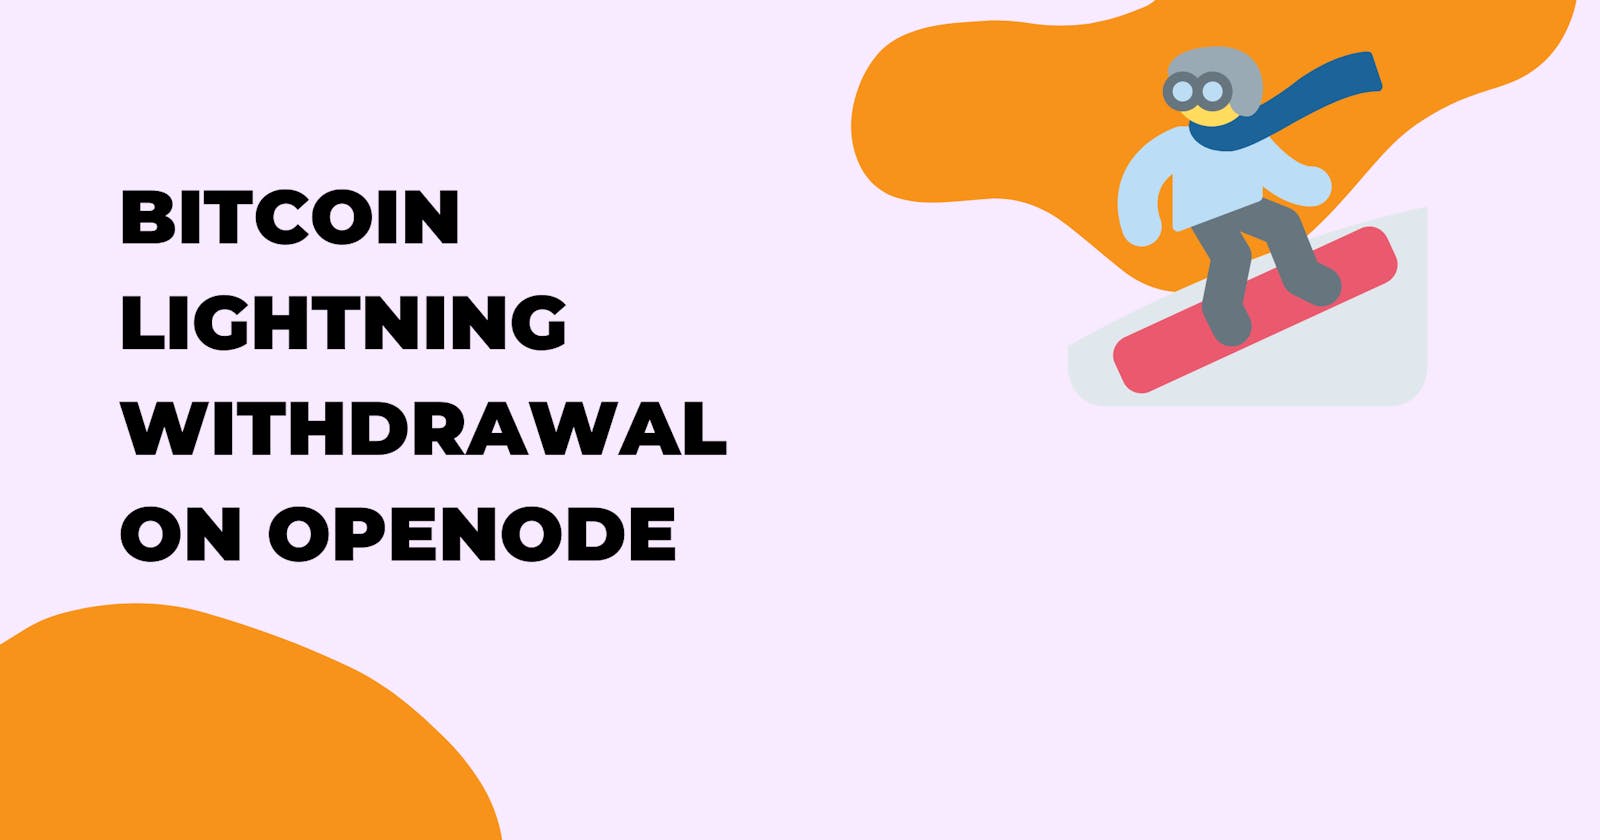 Initiate Bitcoin Lightning withdrawals on OpenNode API